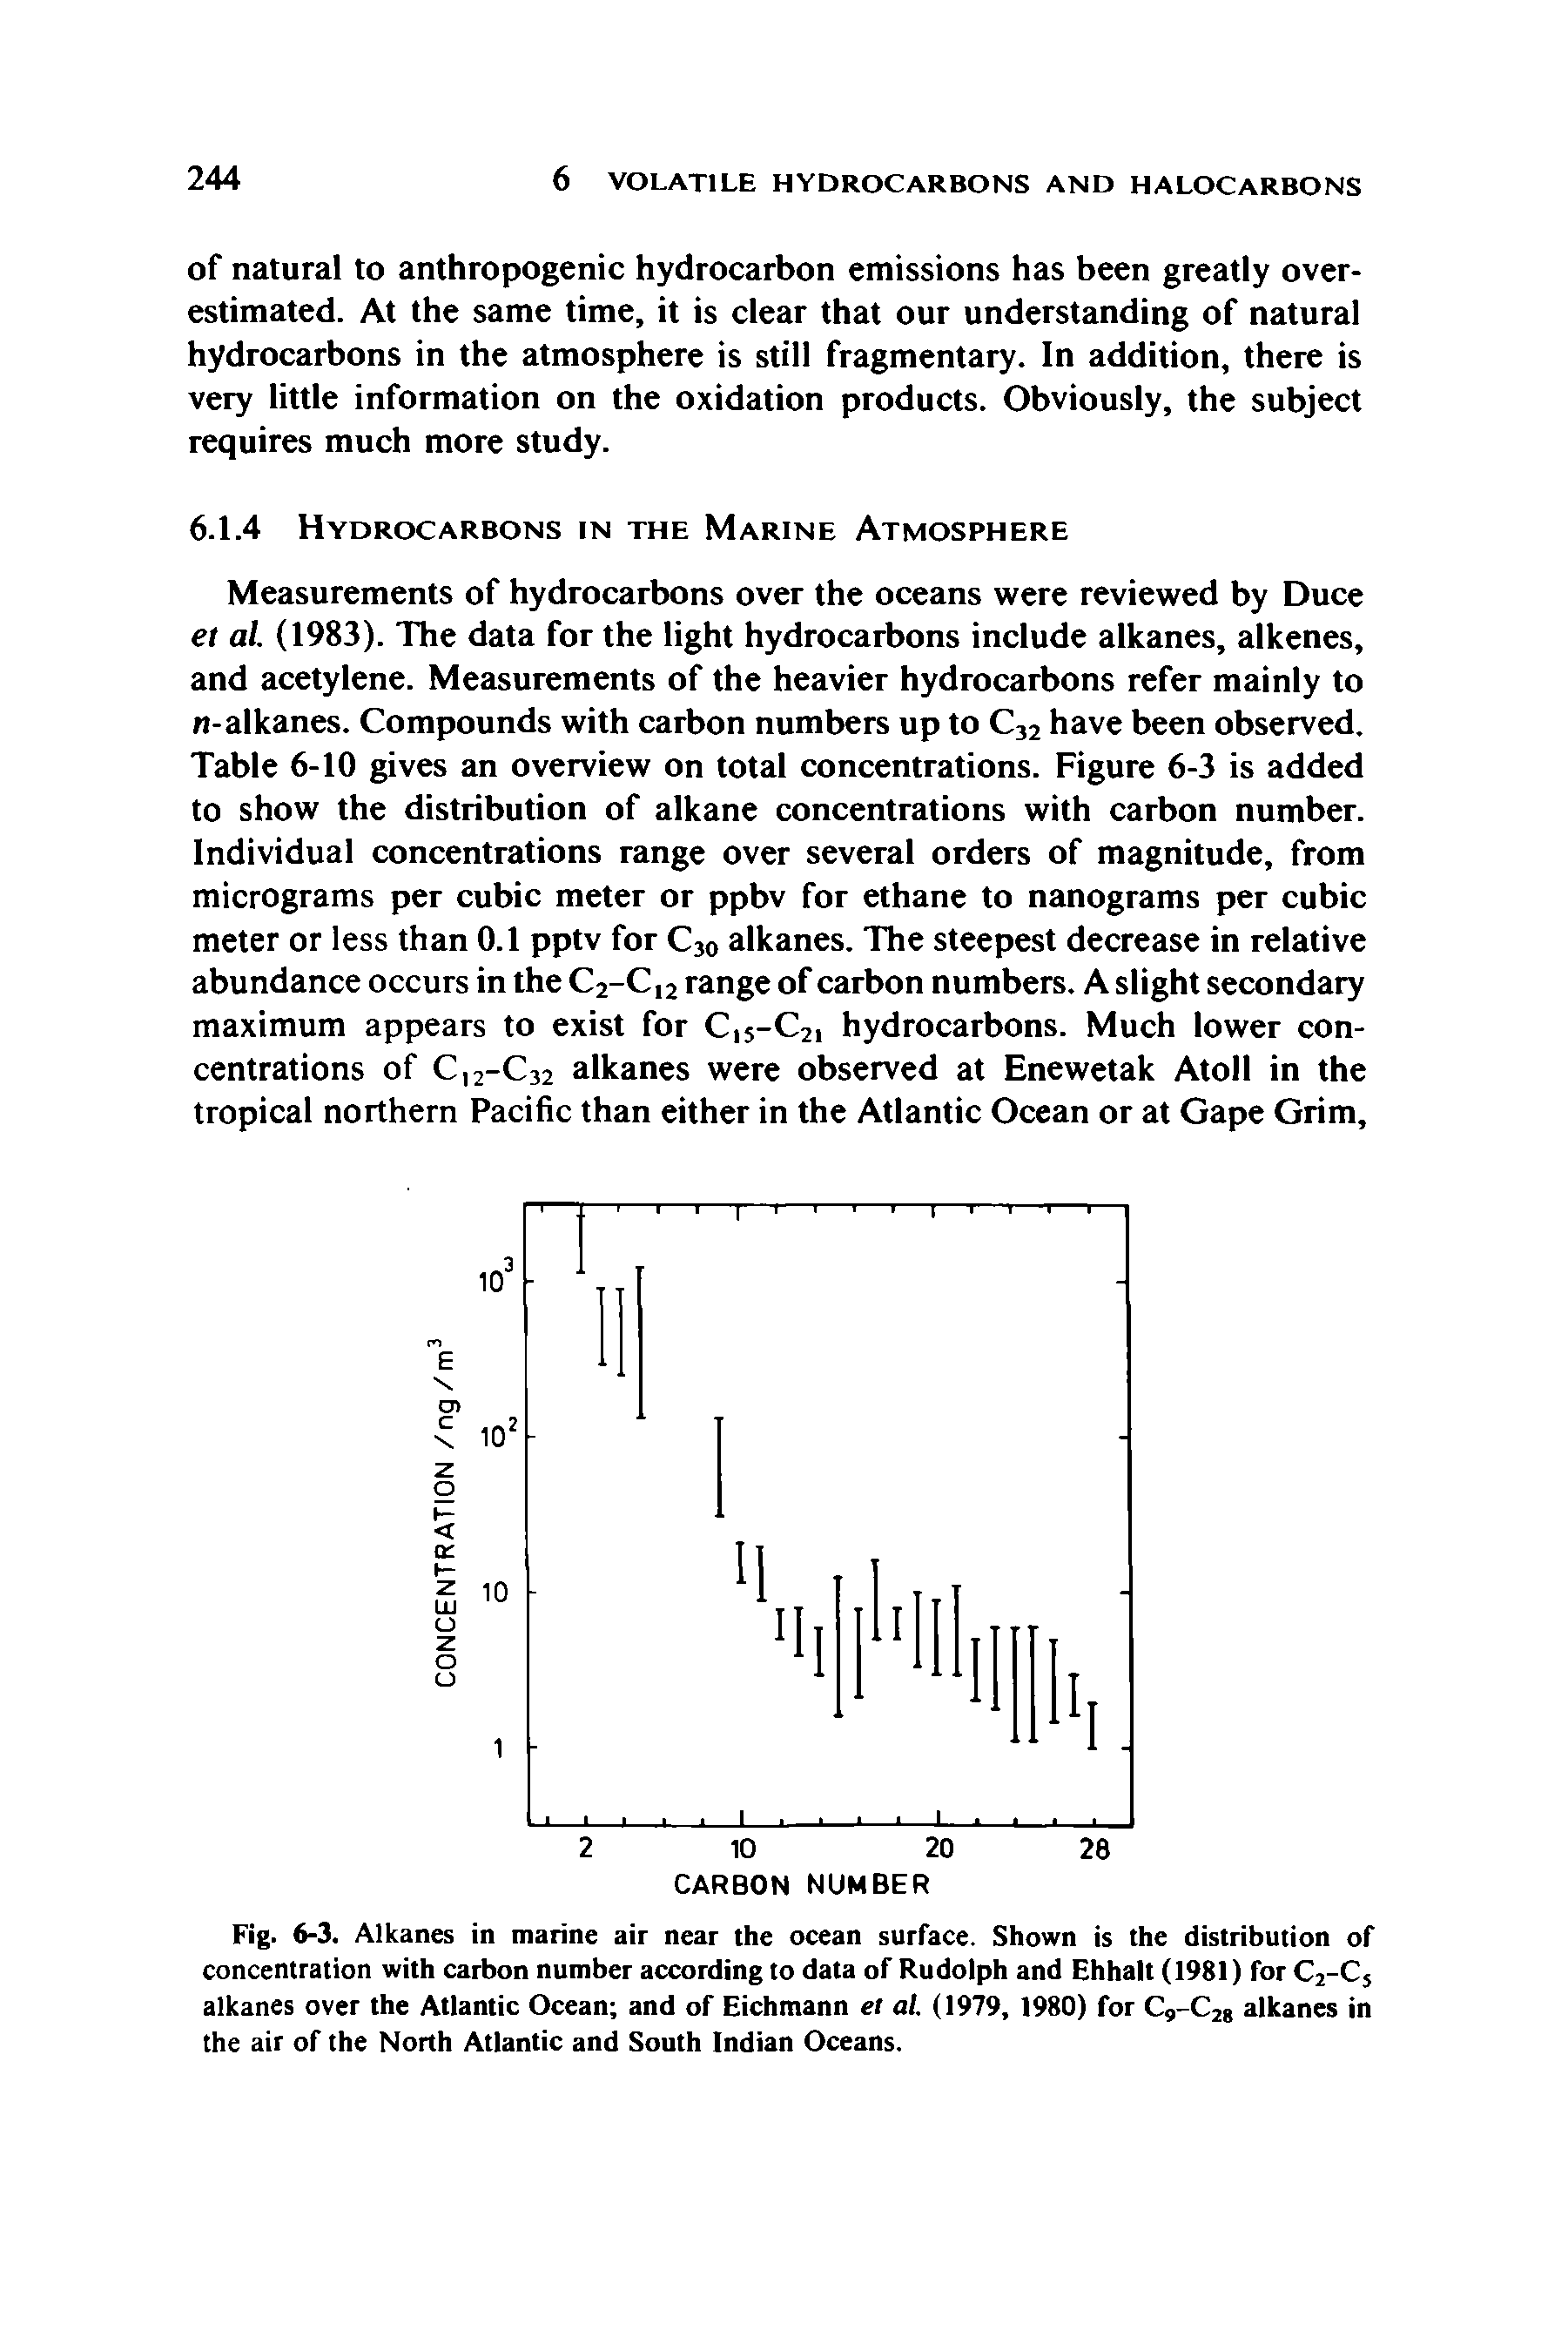 Fig. 6-3. Alkanes in marine air near the ocean surface. Shown is the distribution of concentration with carbon number according to data of Rudolph and Ehhalt (1981) for C2-C5 alkanes over the Atlantic Ocean and of Eichmann el al. (1979, 1980) for C,-C28 alkanes in the air of the North Atlantic and South Indian Oceans.